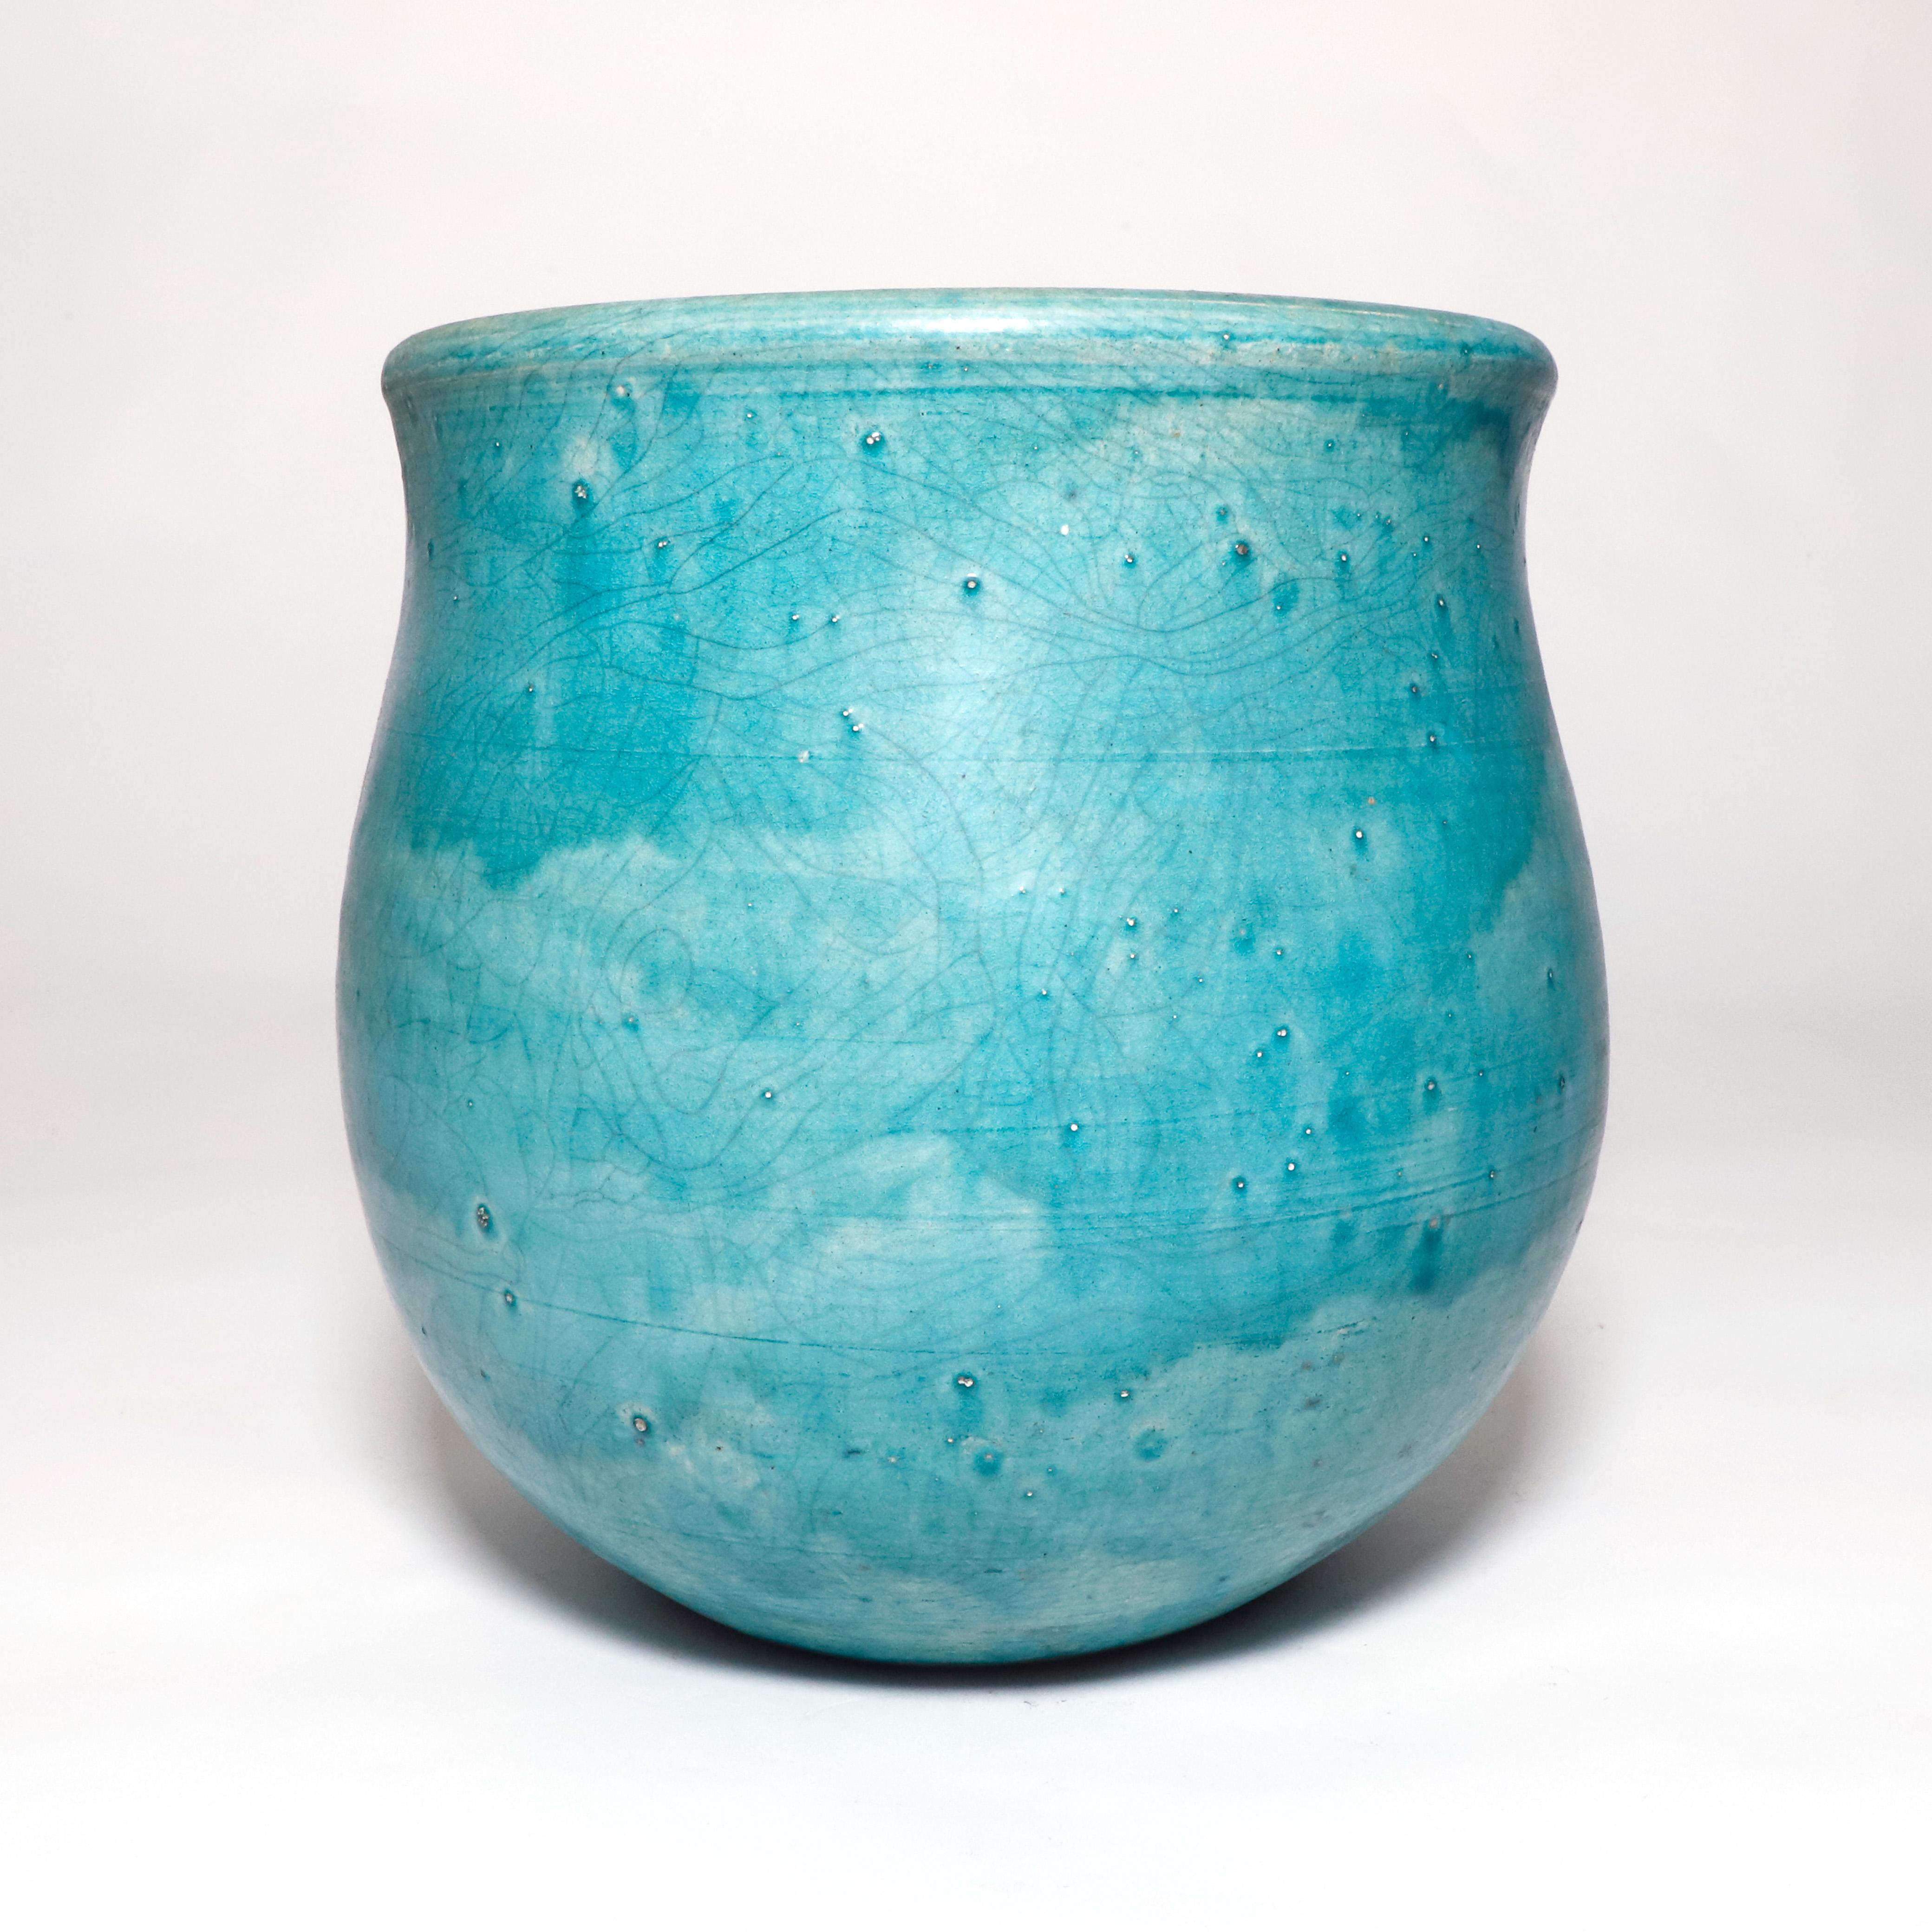 19th Century Geoffrey Borr vase glazed in a beutiful turquoise color. A very nice and sculptural piece of pottery. Signed Borr on the base.

Property from esteemed interior designer Juan Montoya. Juan Montoya is one of the most acclaimed and